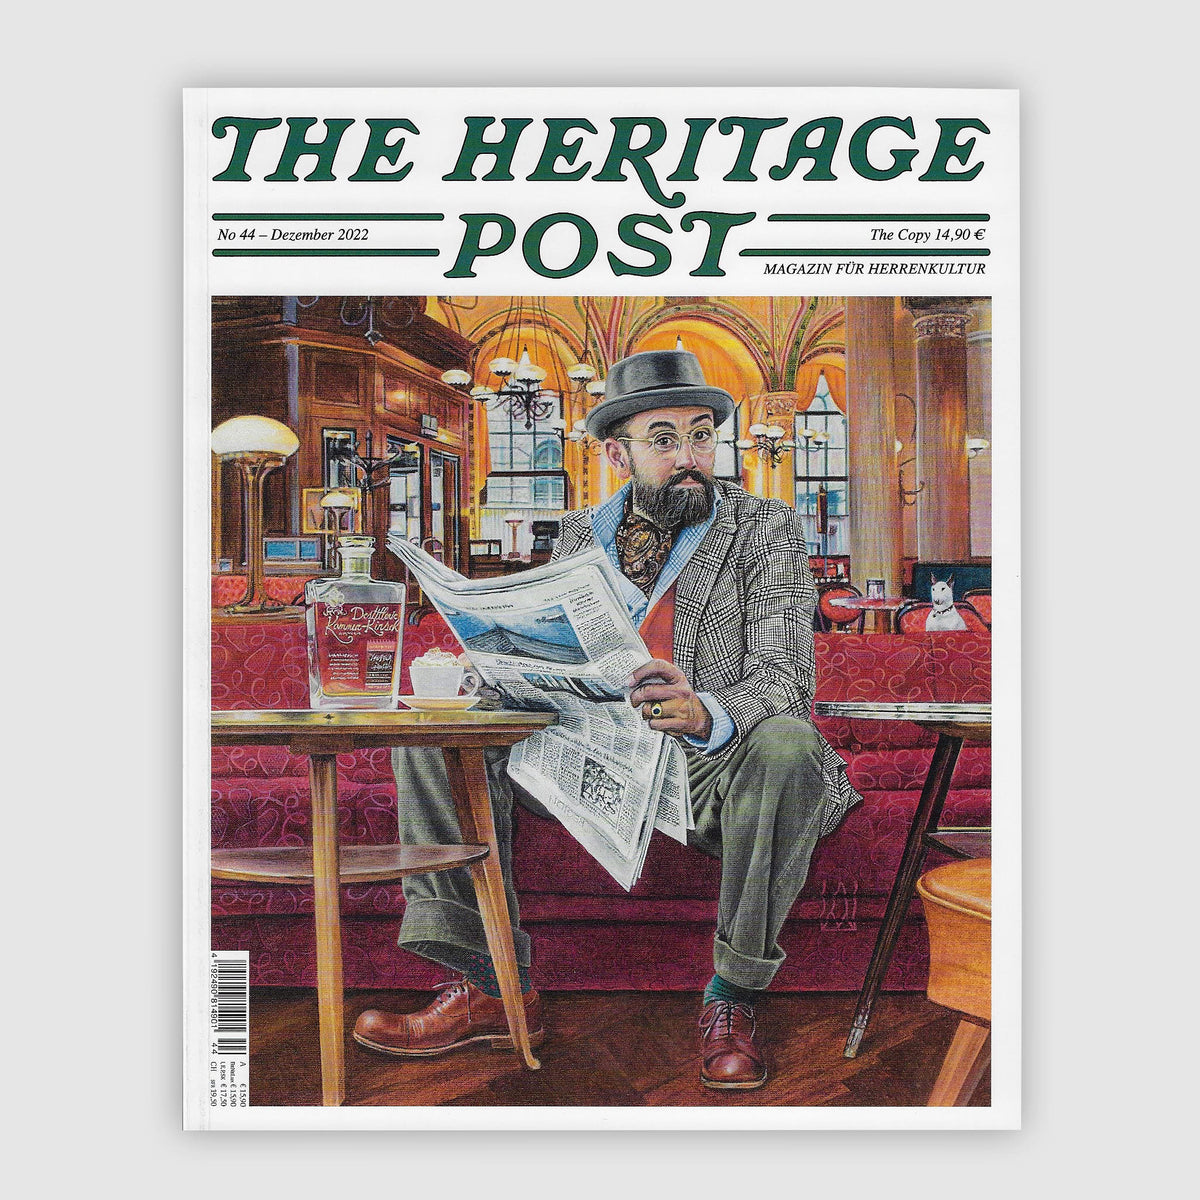 The Heritage Post No. 44